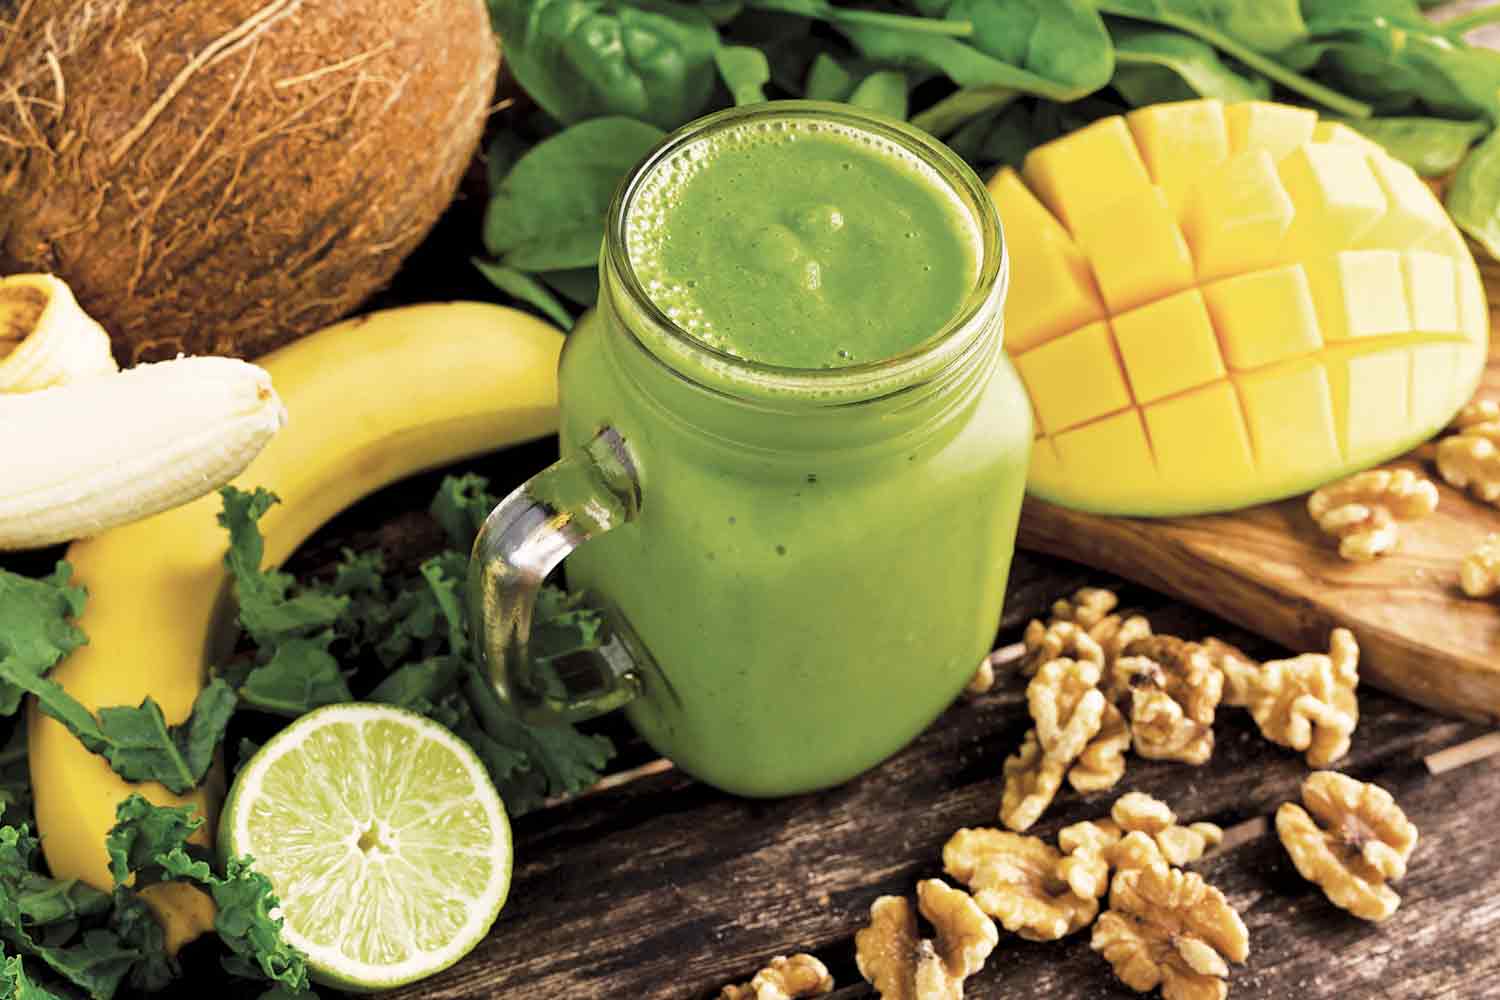 In the weeks leading up to the race - Healthy snacks and smoothies for good eating habits